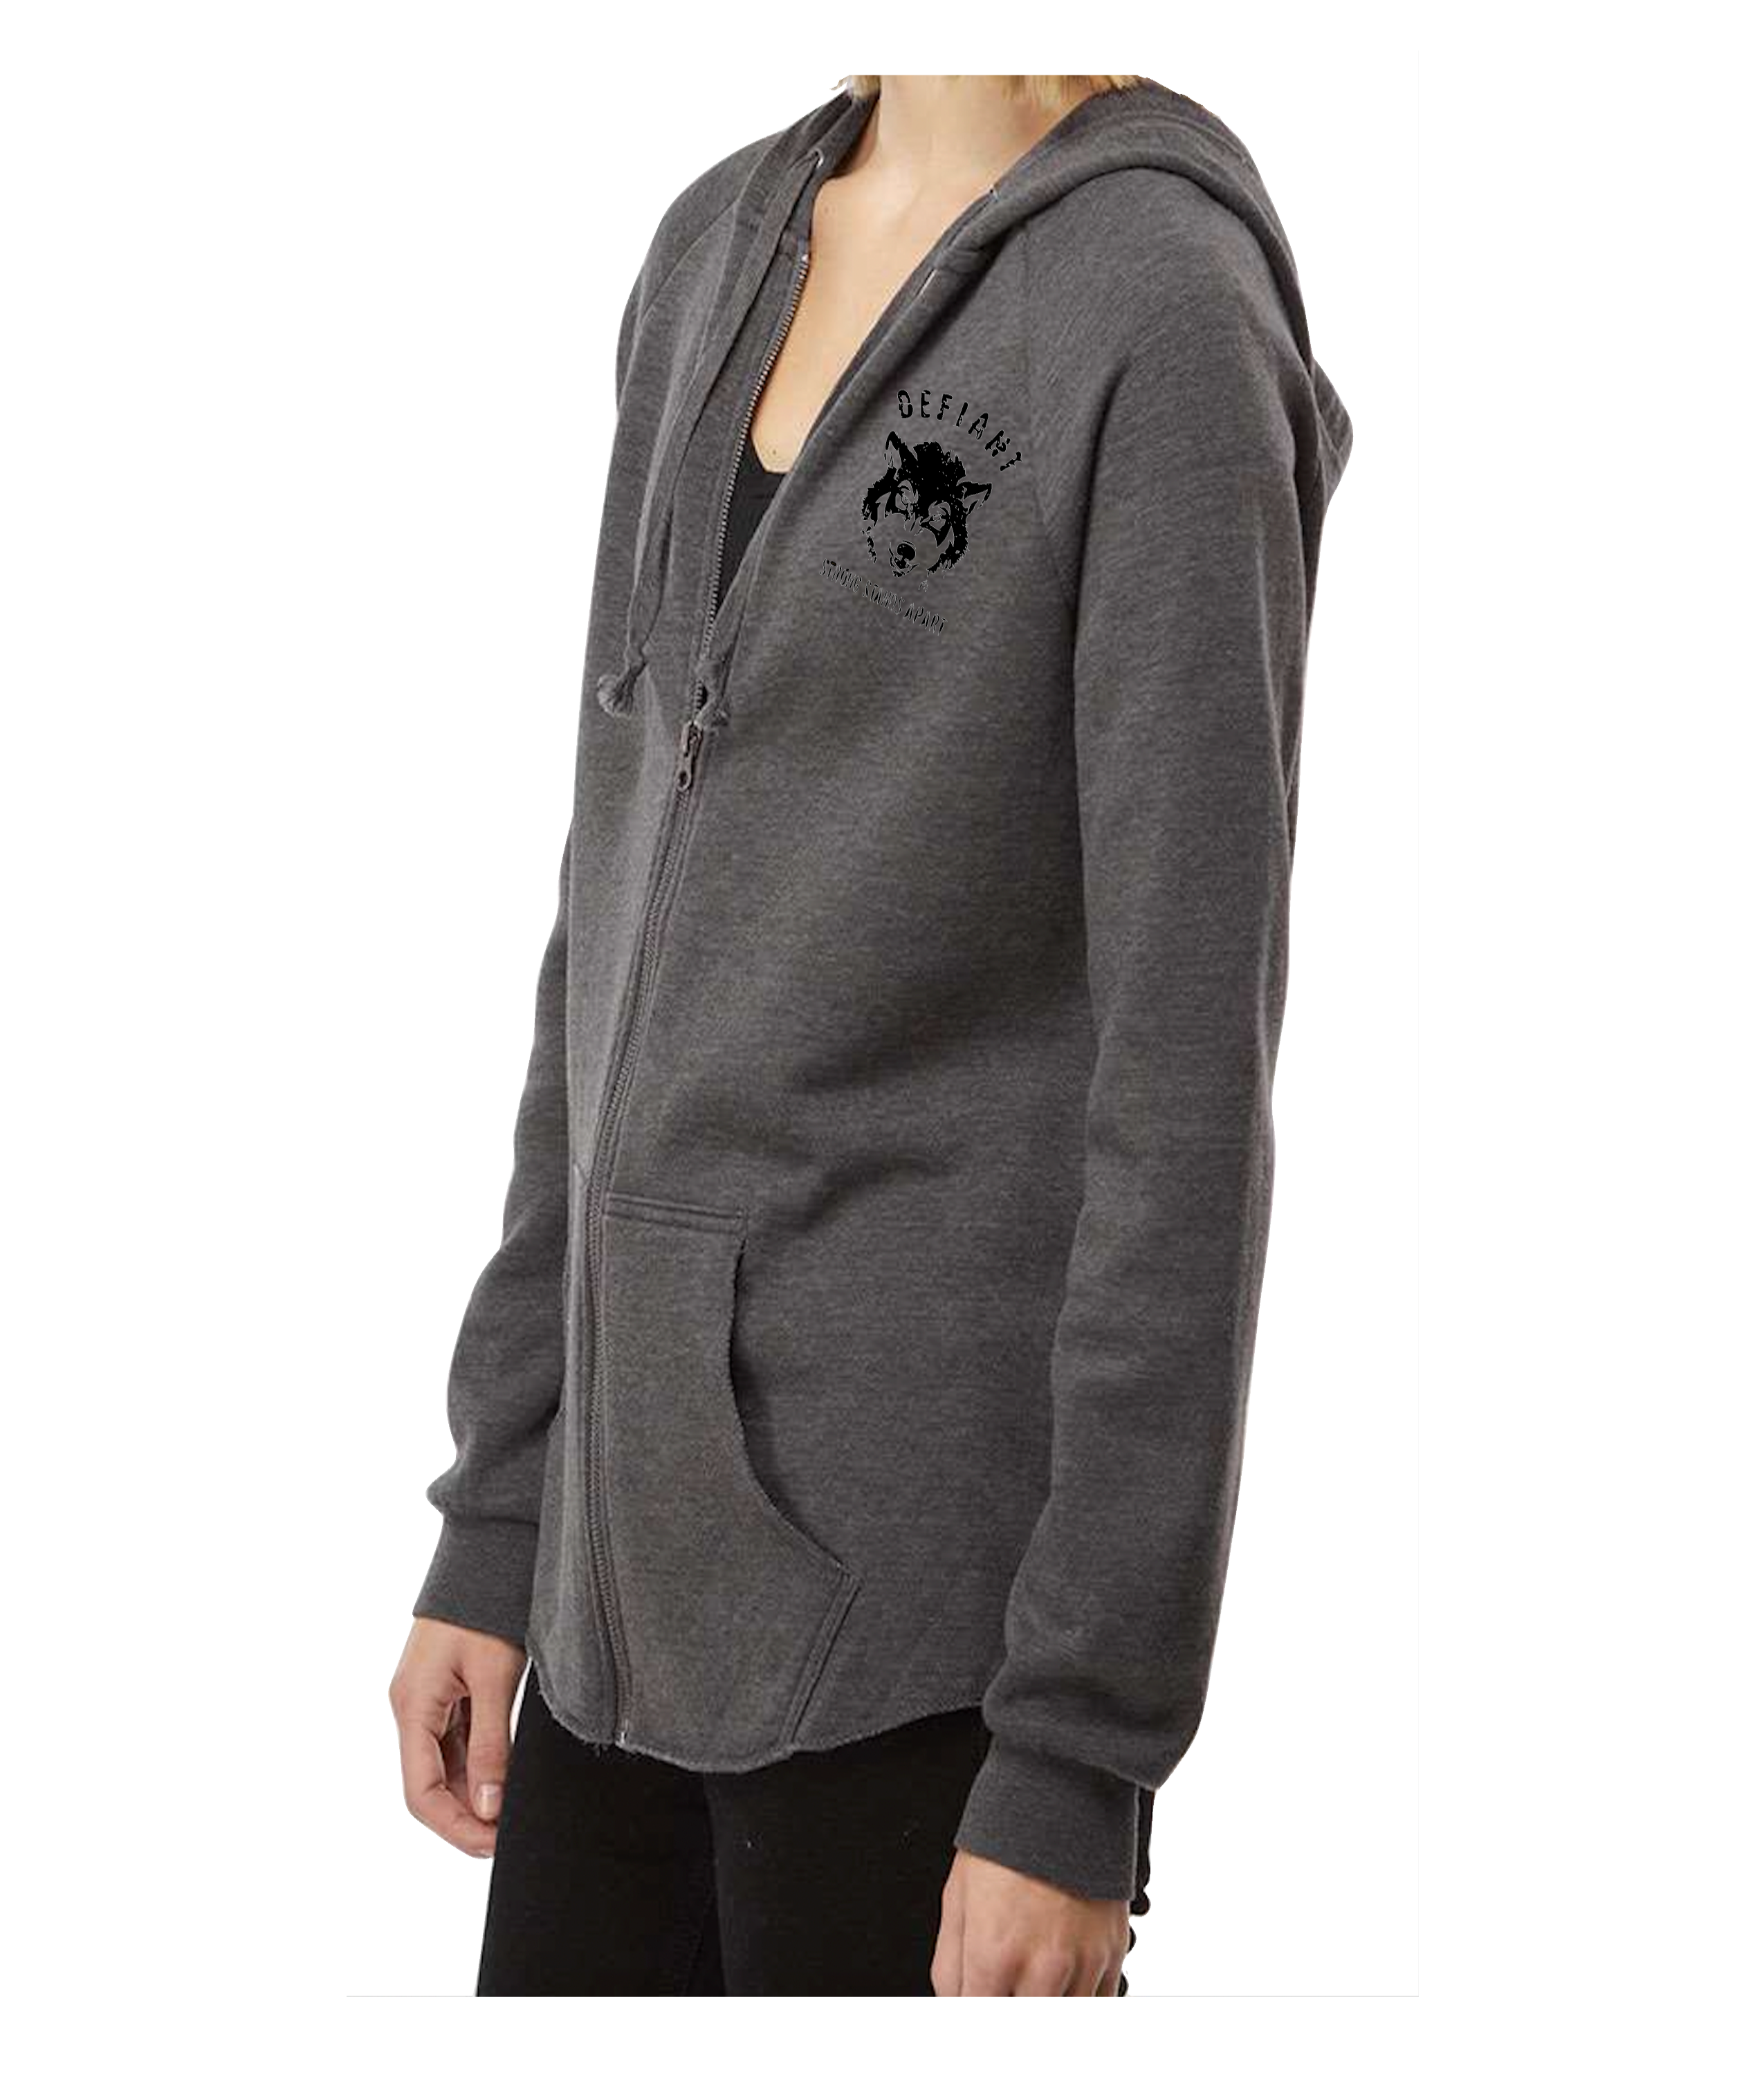 WOMEN'S WAVE WASH FULL ZIP HOODIE - DEFY WEAKNESS - HEATHERED SHADOW - This run only a few sizes left